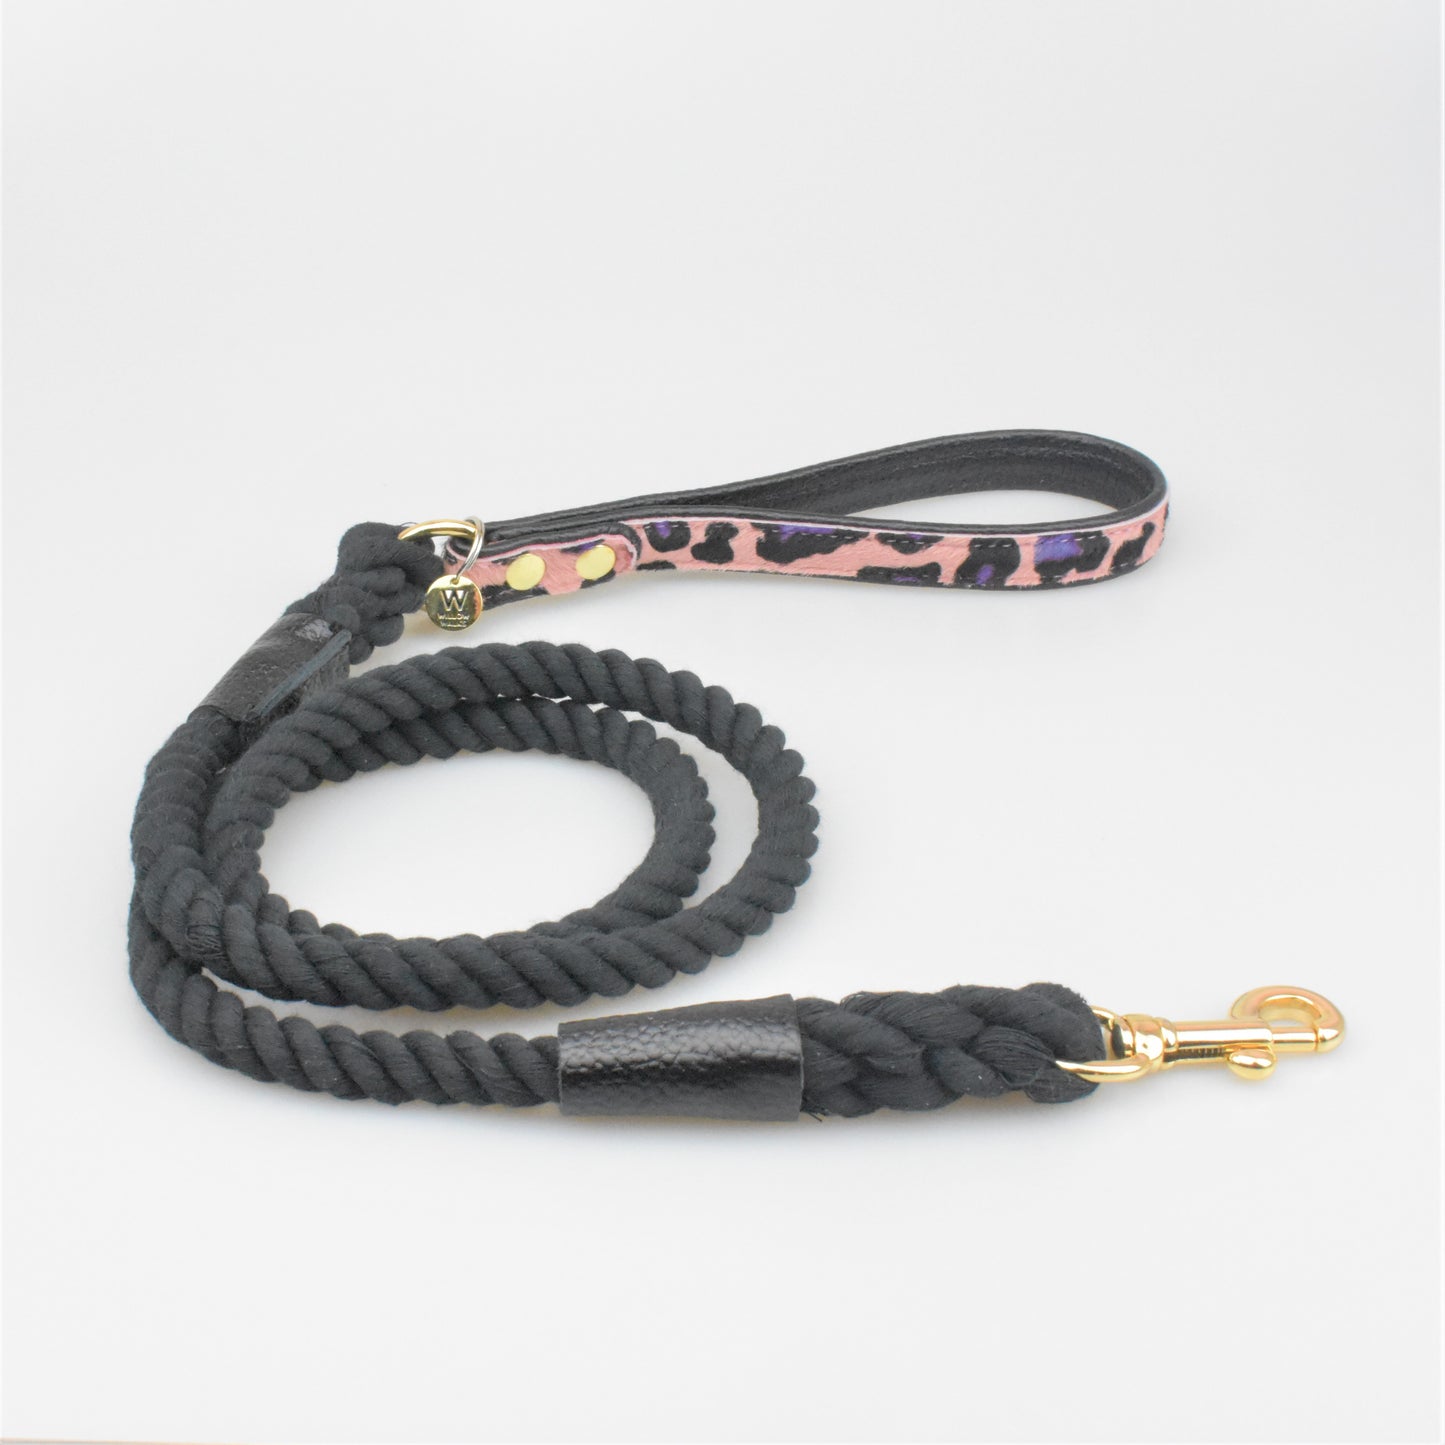 Willow Walks rope lead with leather handle in black and multi leo